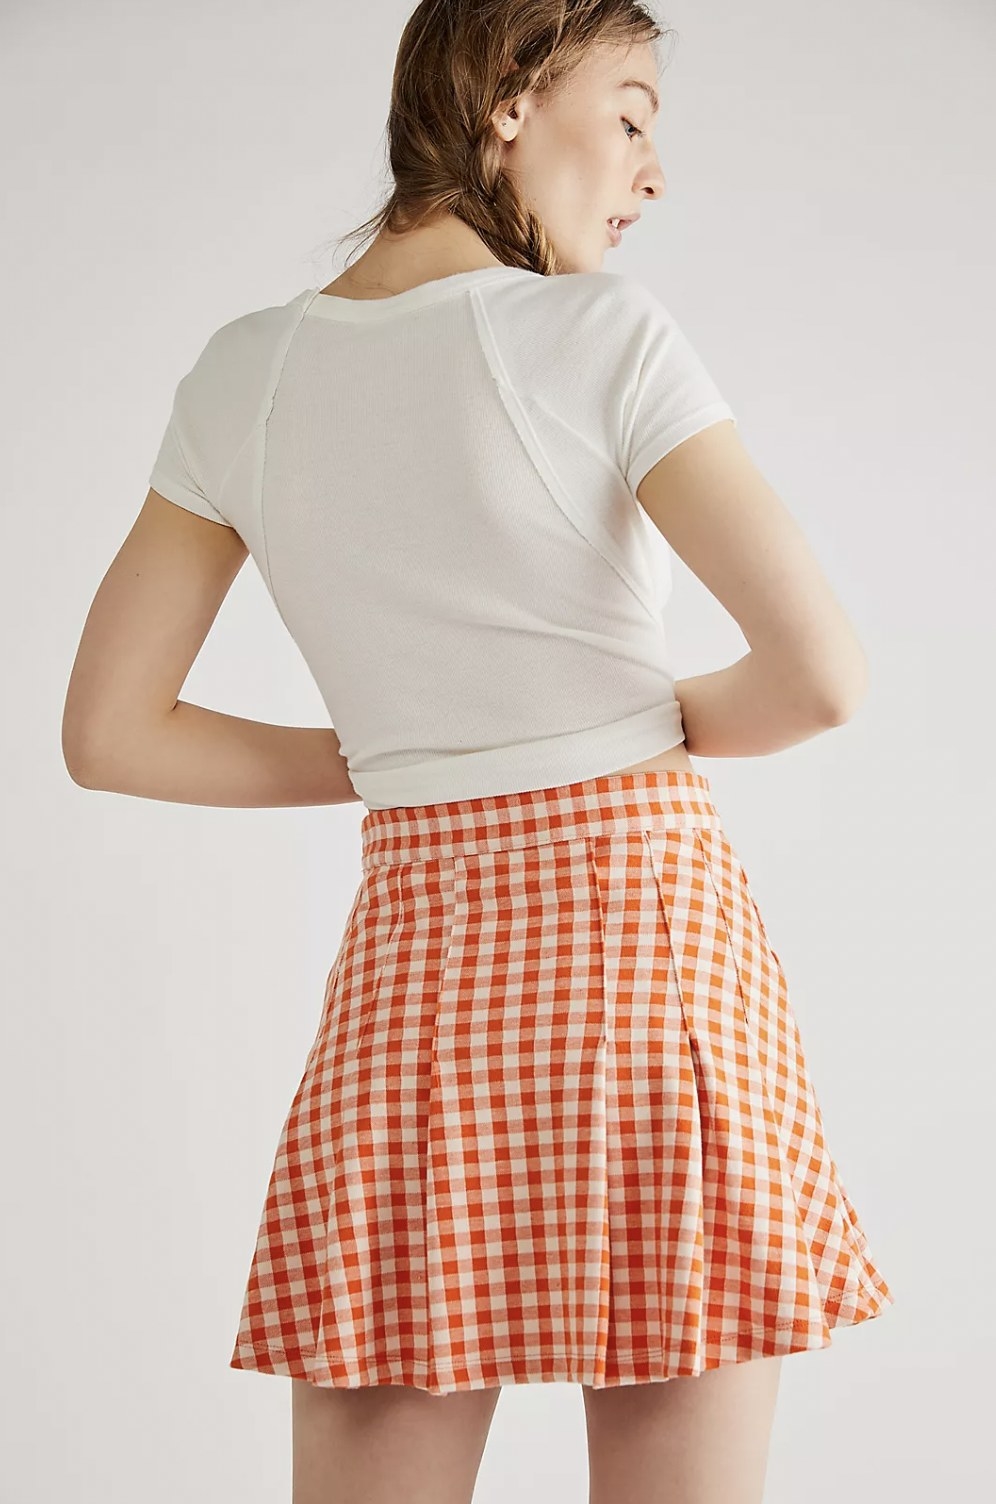 Model from behind in the orange and white plaid skirt with white top